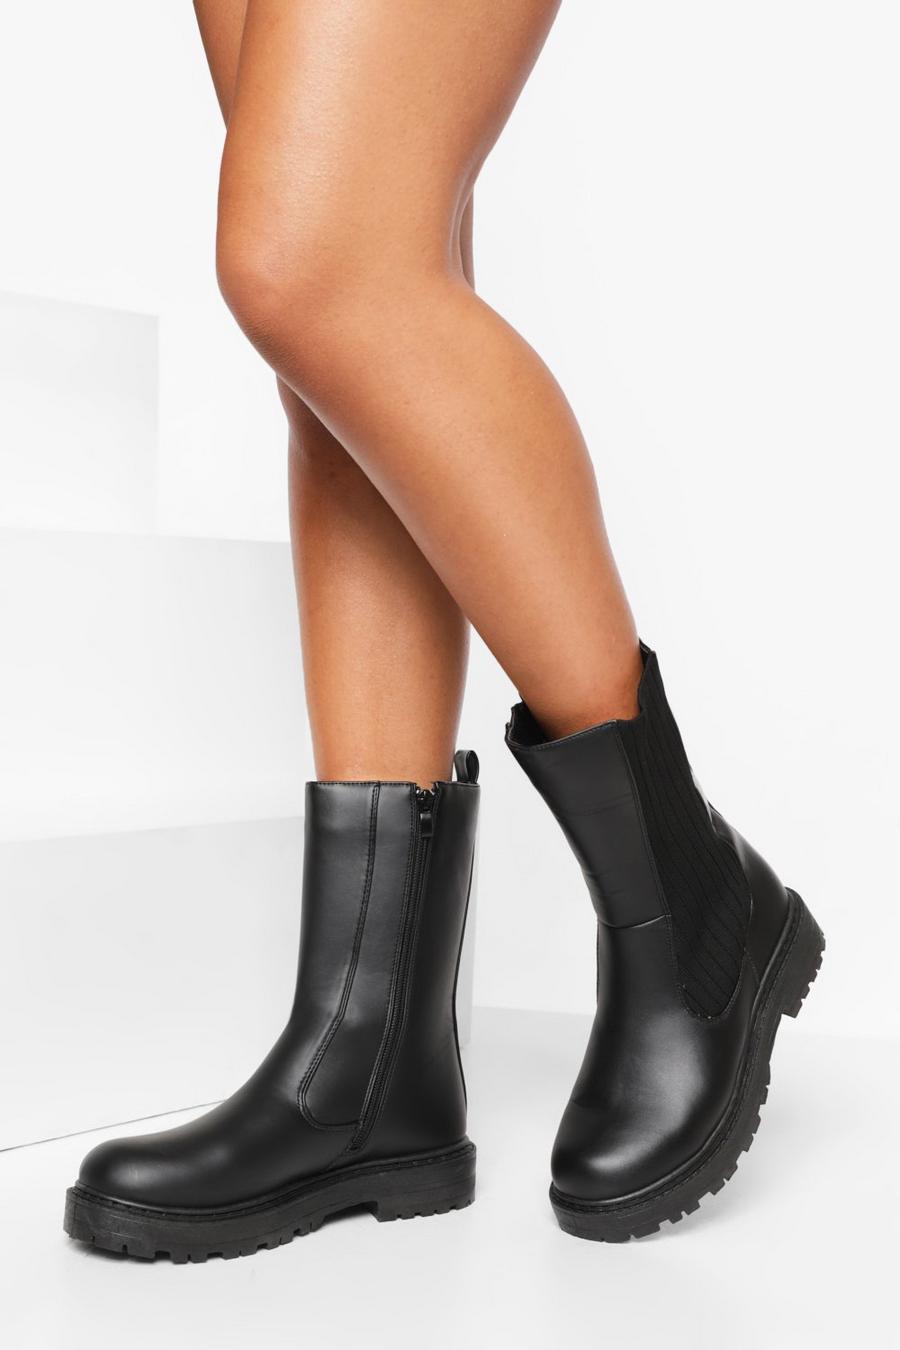 Black Wide Width Calf High Chelsea Boots image number 1